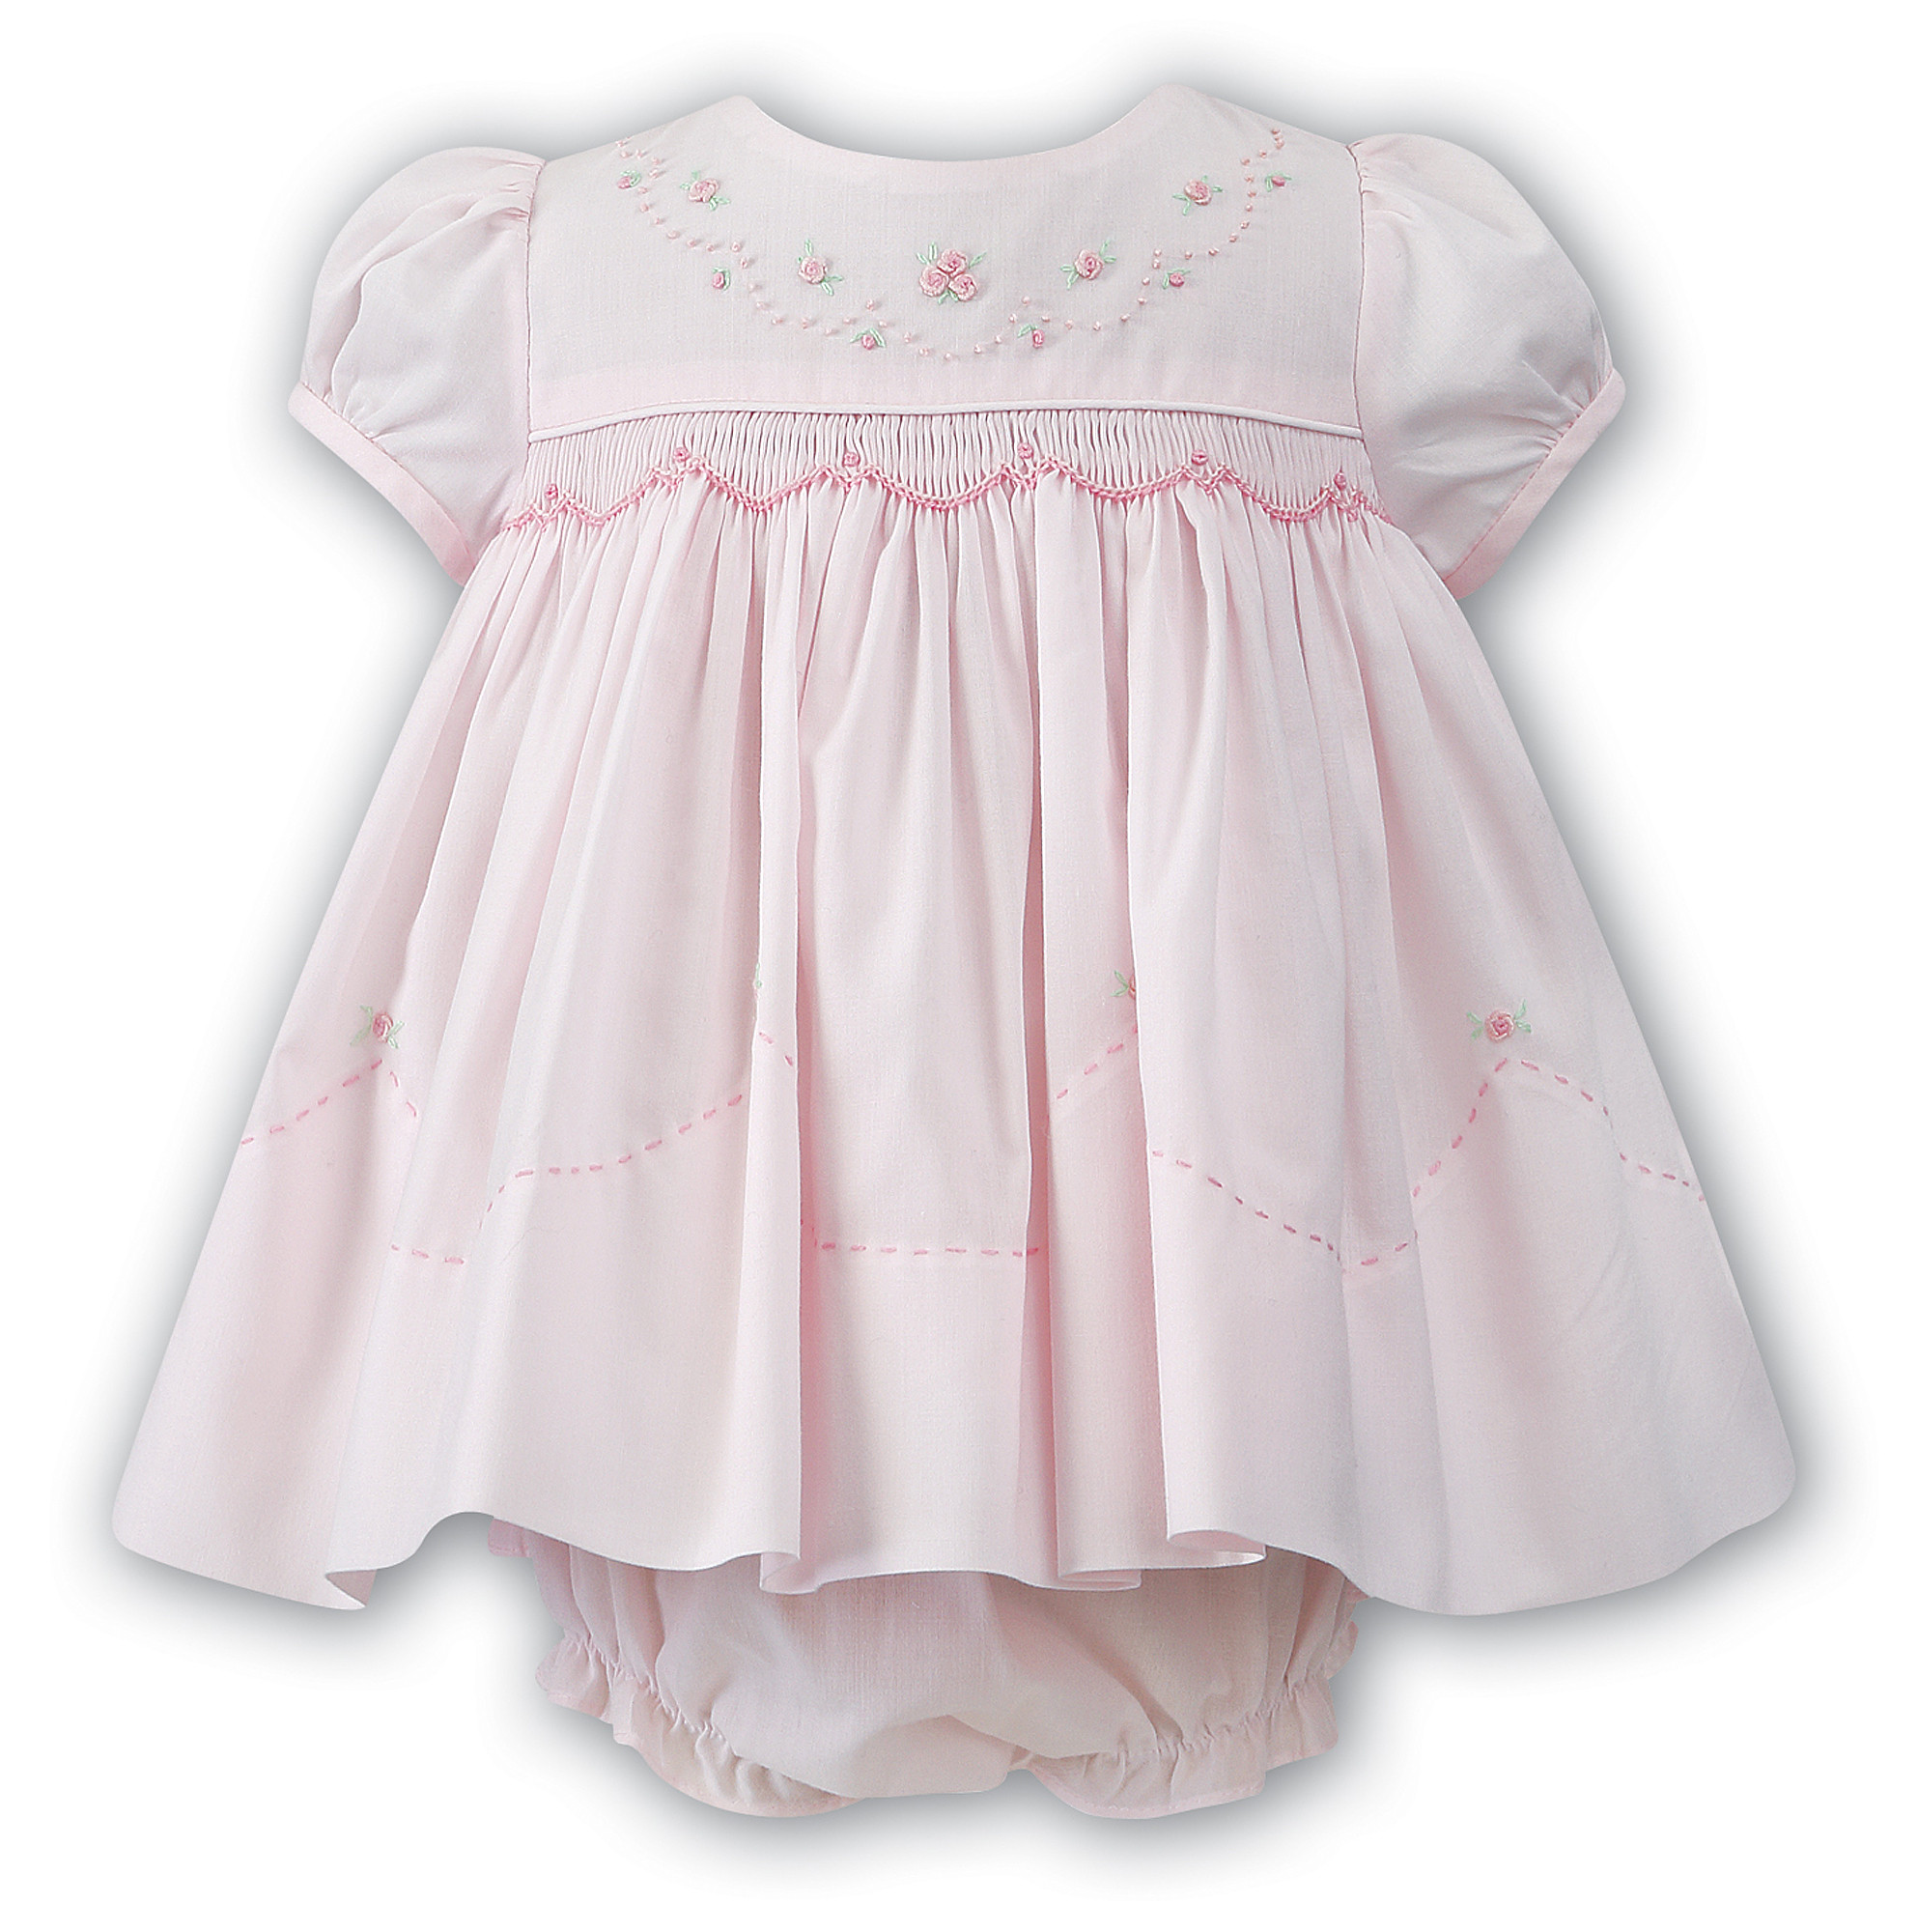 Baby Fashion Boutique
 Embroidered Dress Set